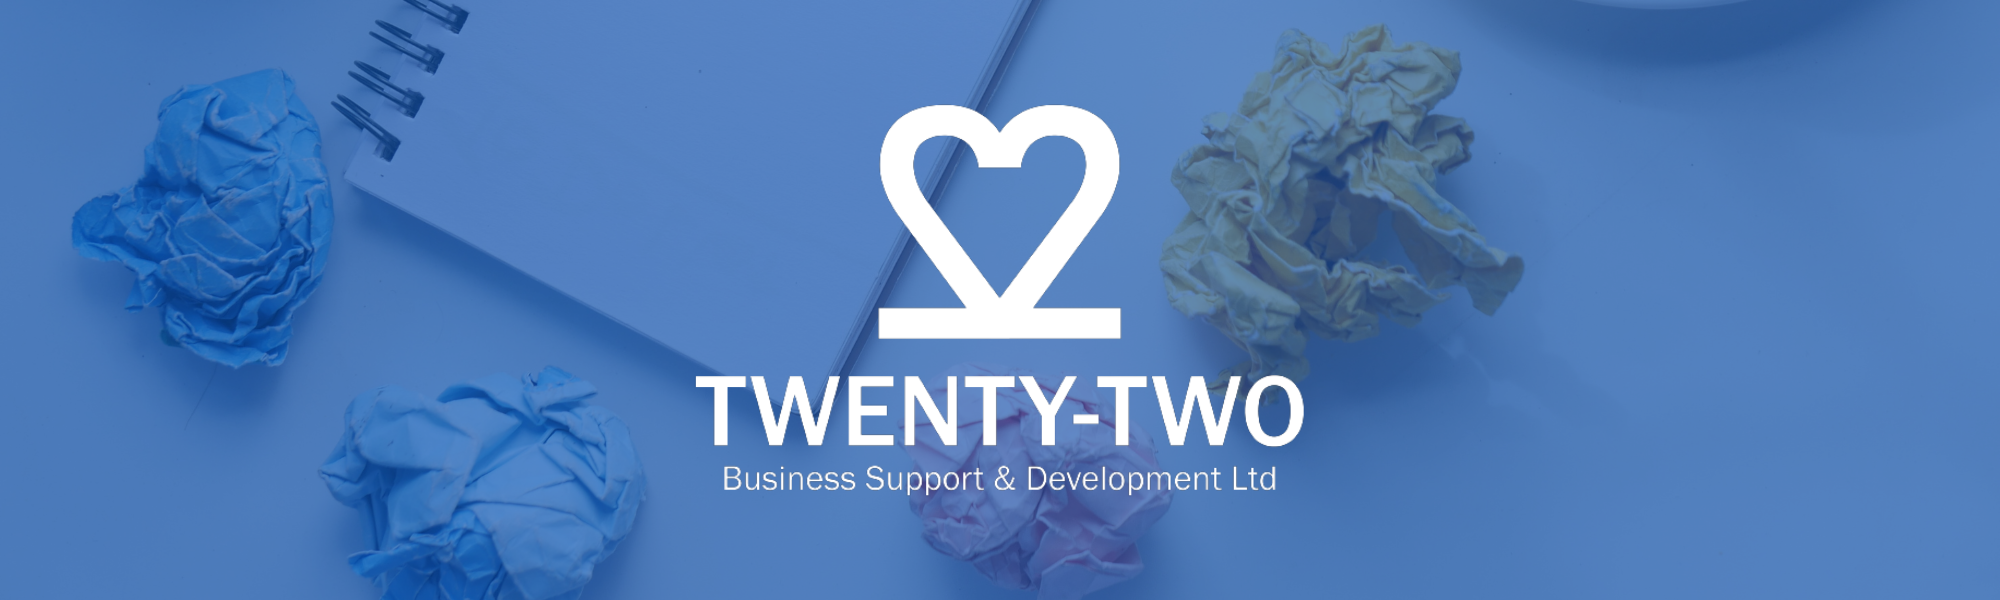 Slightly transparent blue banner with Twenty-Two Business Support & Development's white logo centred over a background image of scrunched up paper and a notepad. 